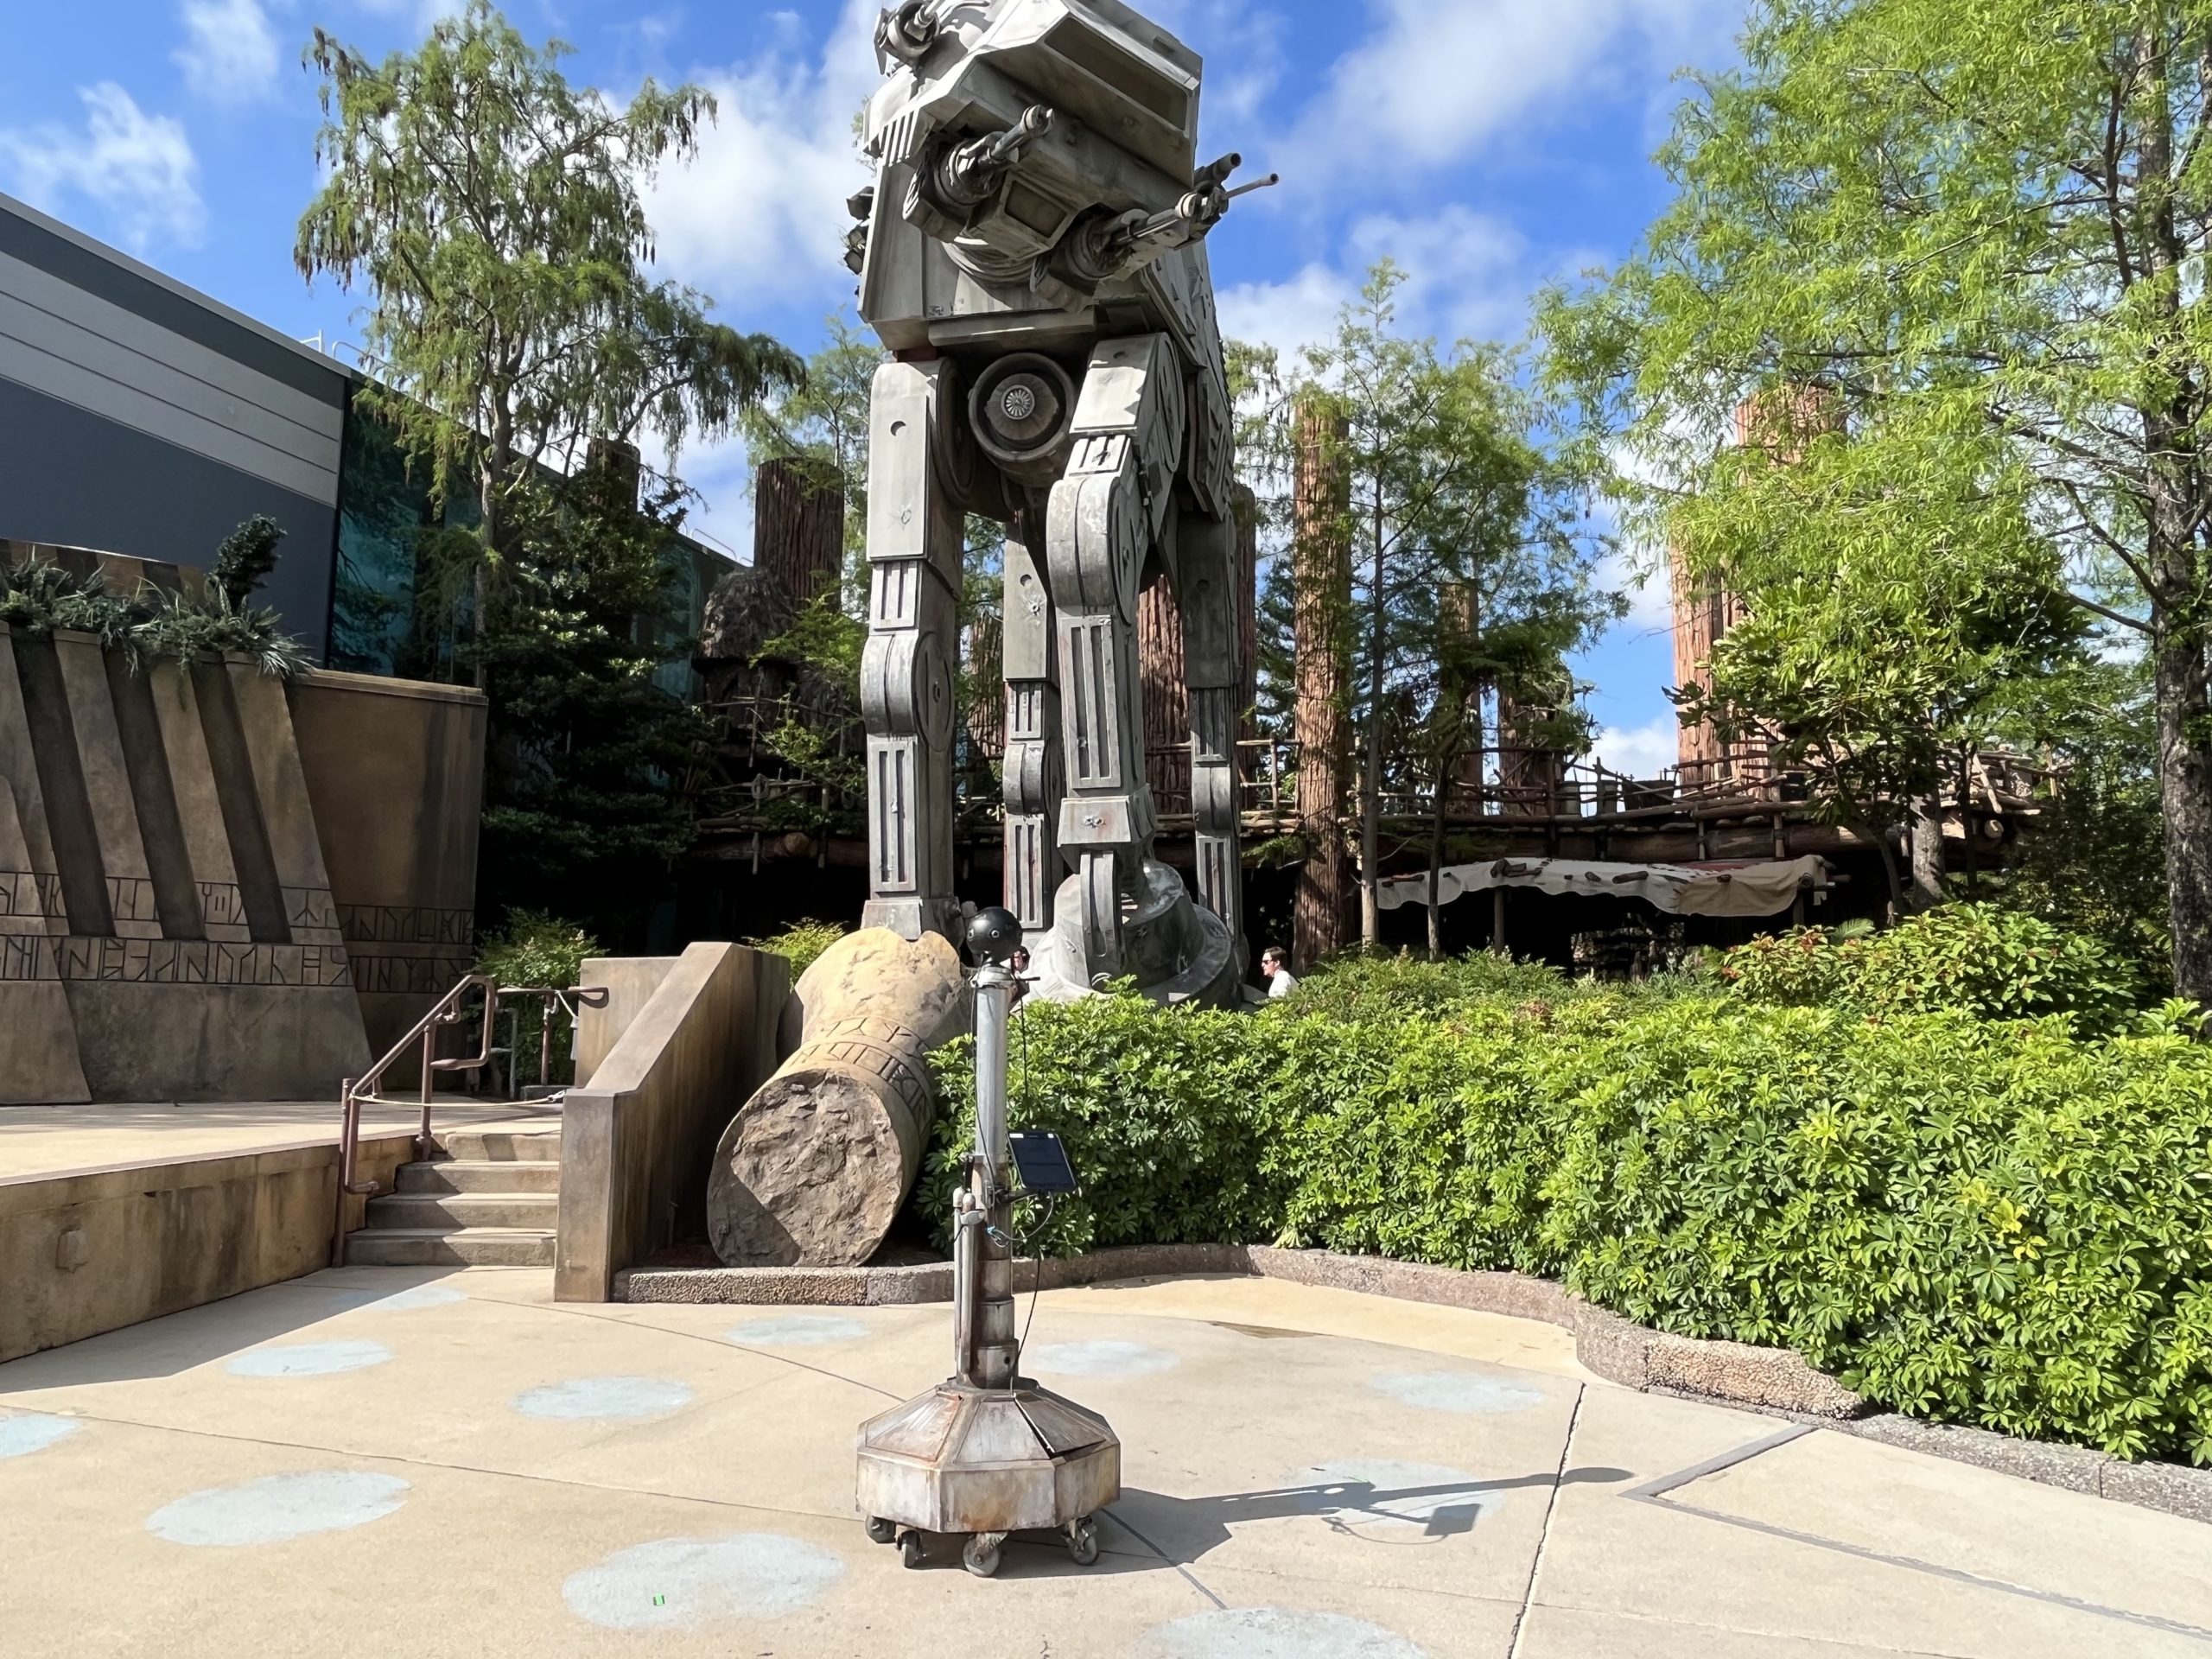 Tiny World Magic Shot in DHS in front of AT-AT